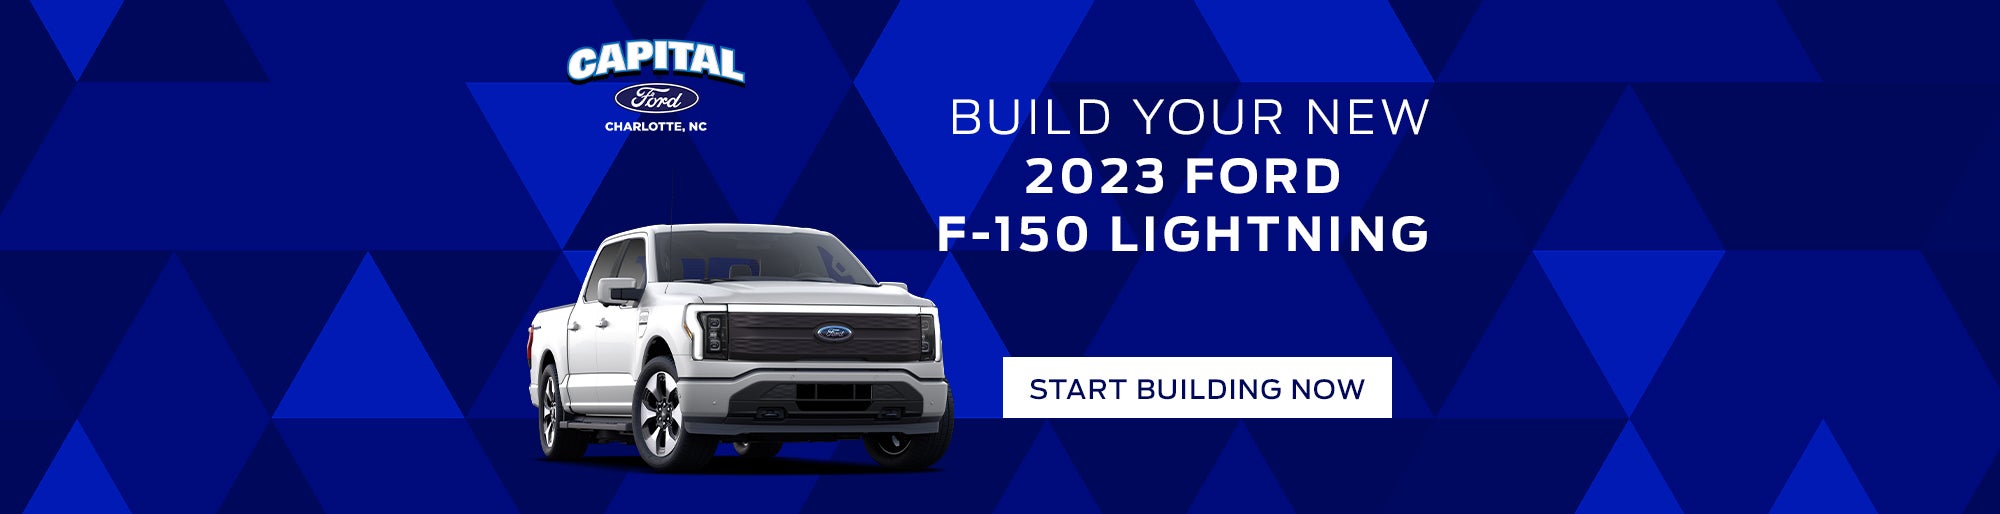 Build Your New 2023 Ford F-150 Lightning Today!